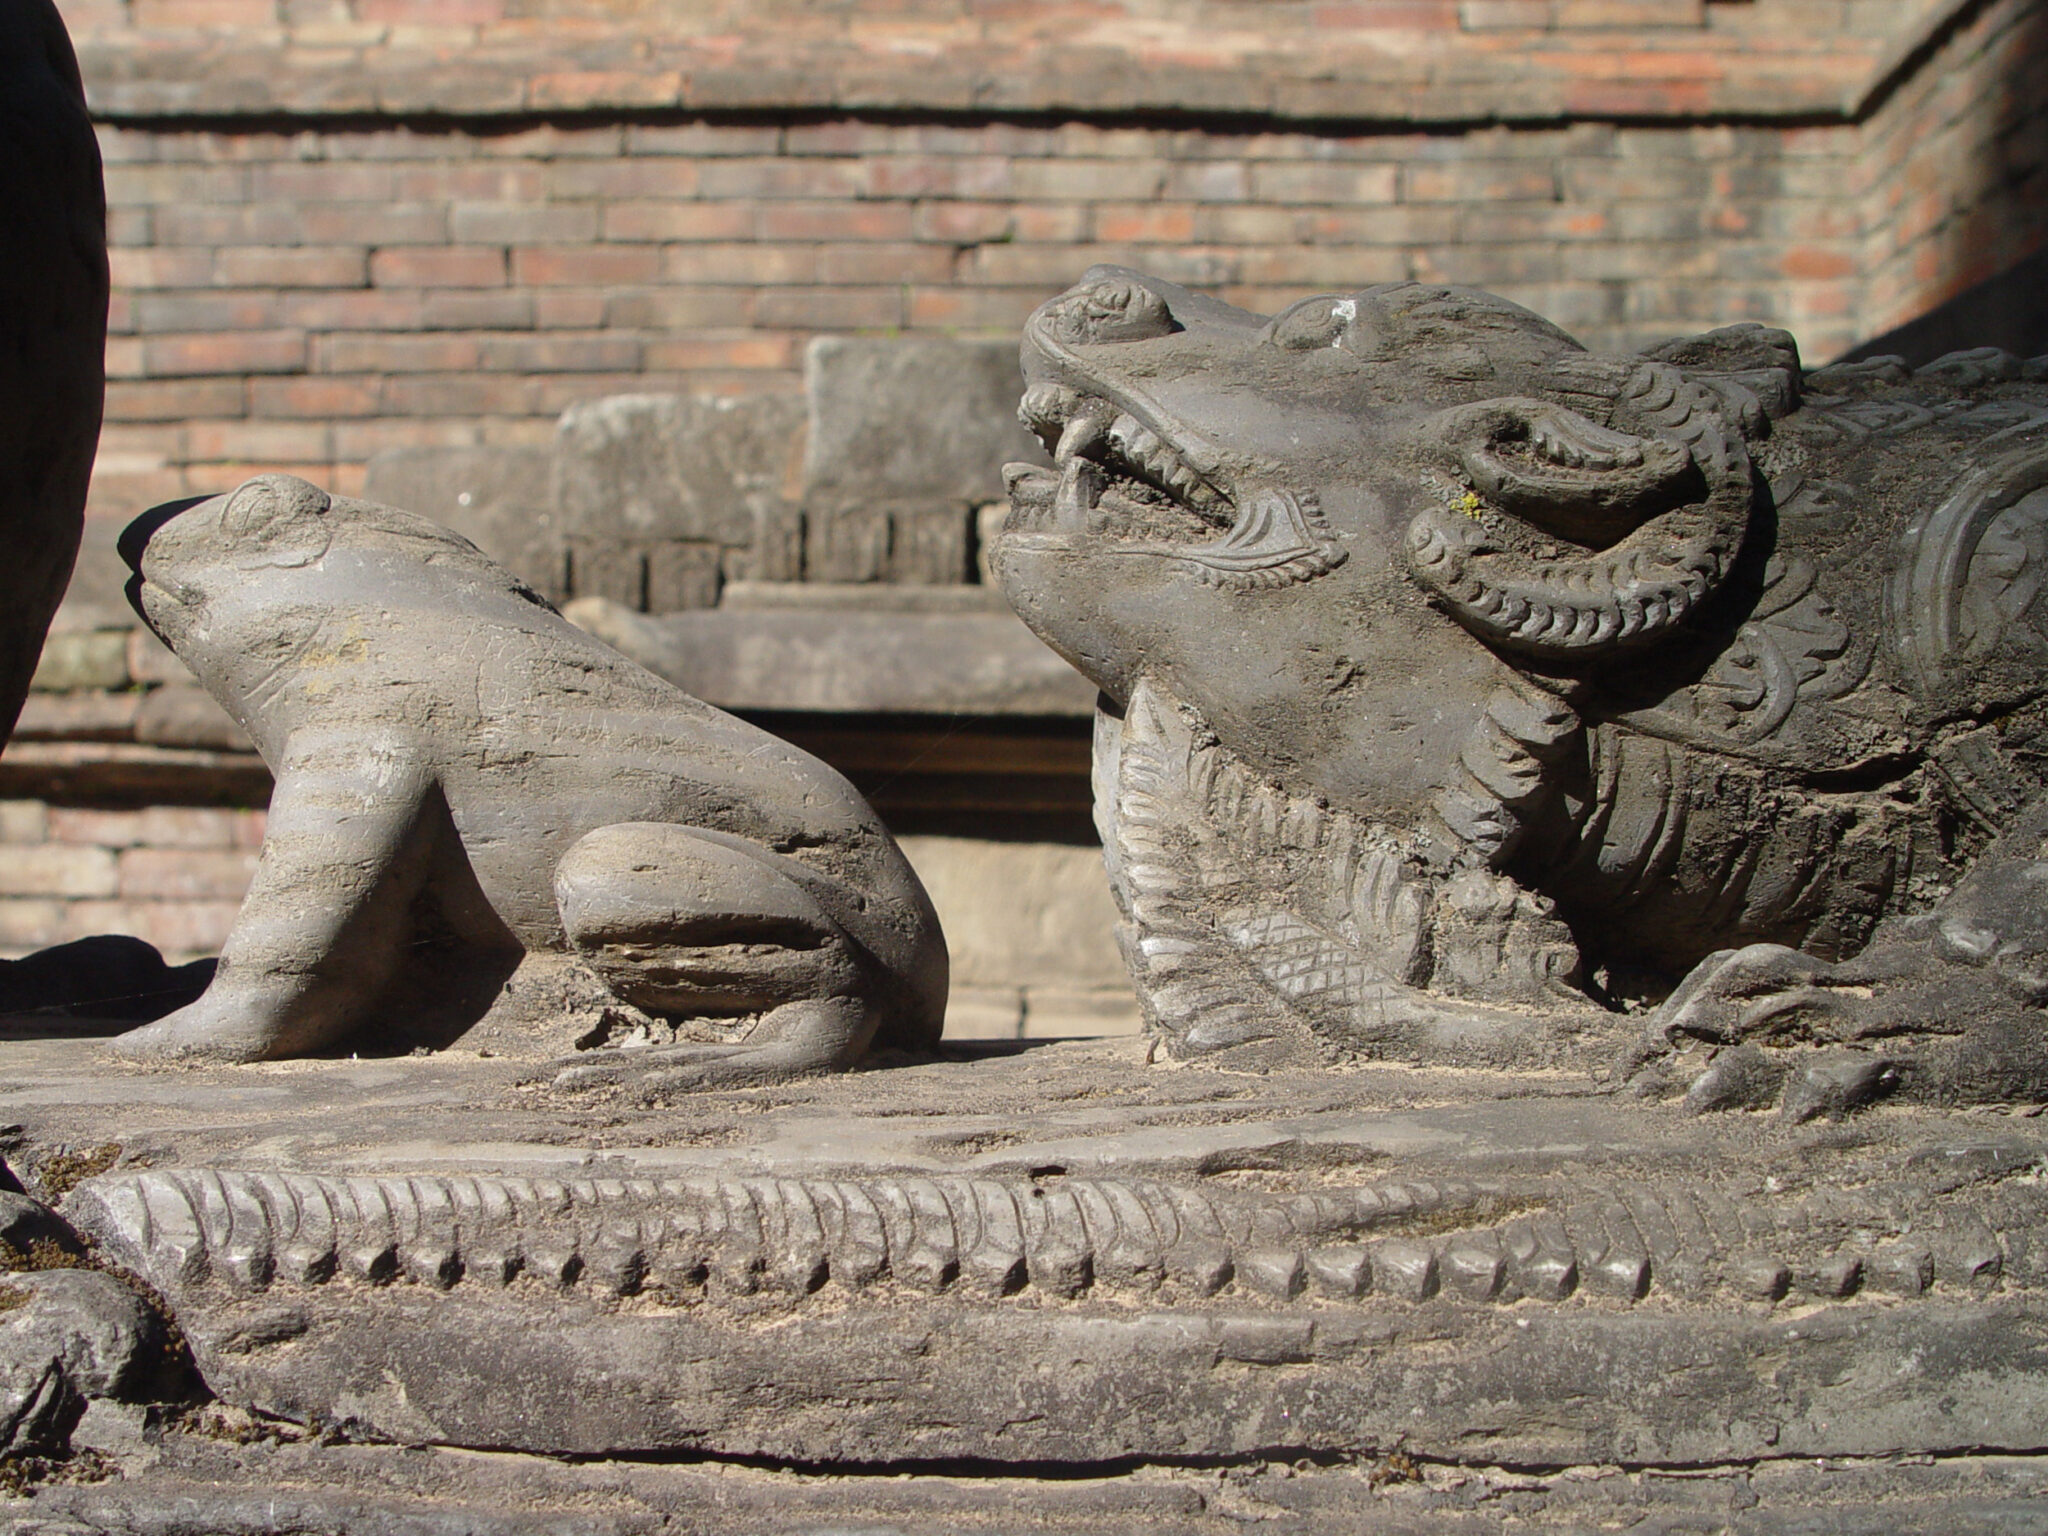 Two stone sculptures depicting animals: frog at left; horned, grinning beast at right